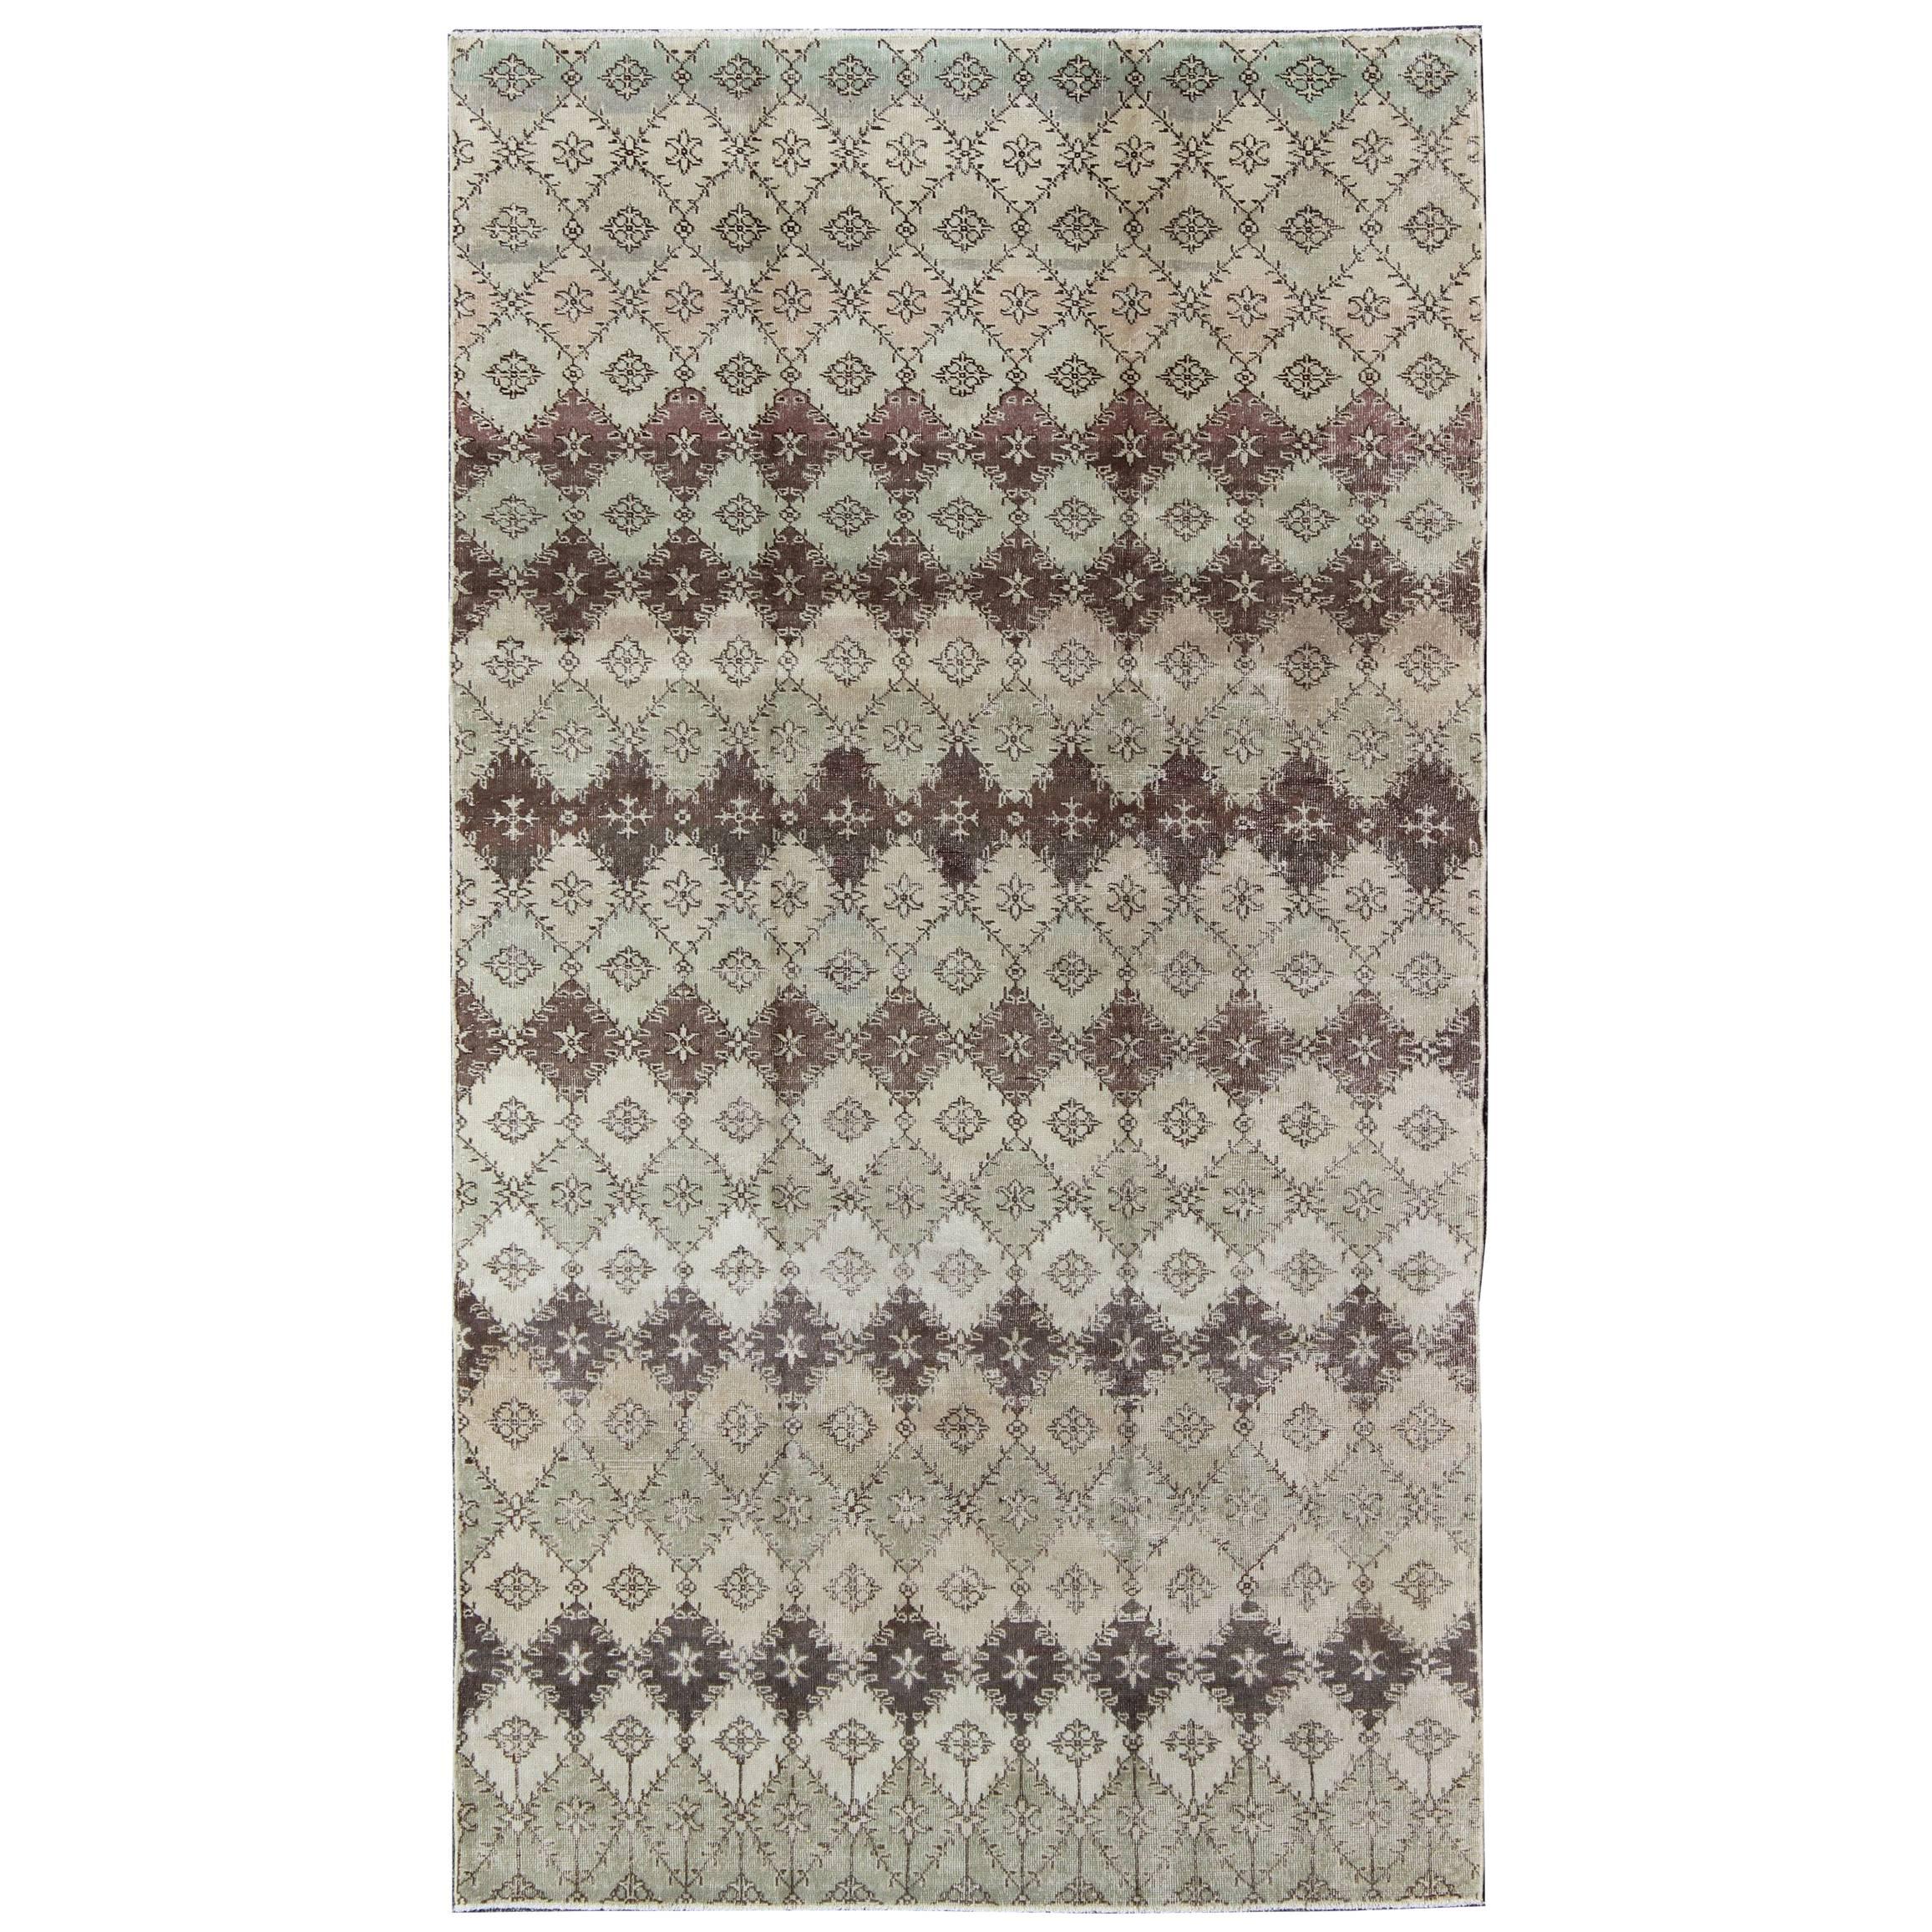 Vintage Distressed Rug with Diamond Modern Design in Earth Tones & Neutrals For Sale